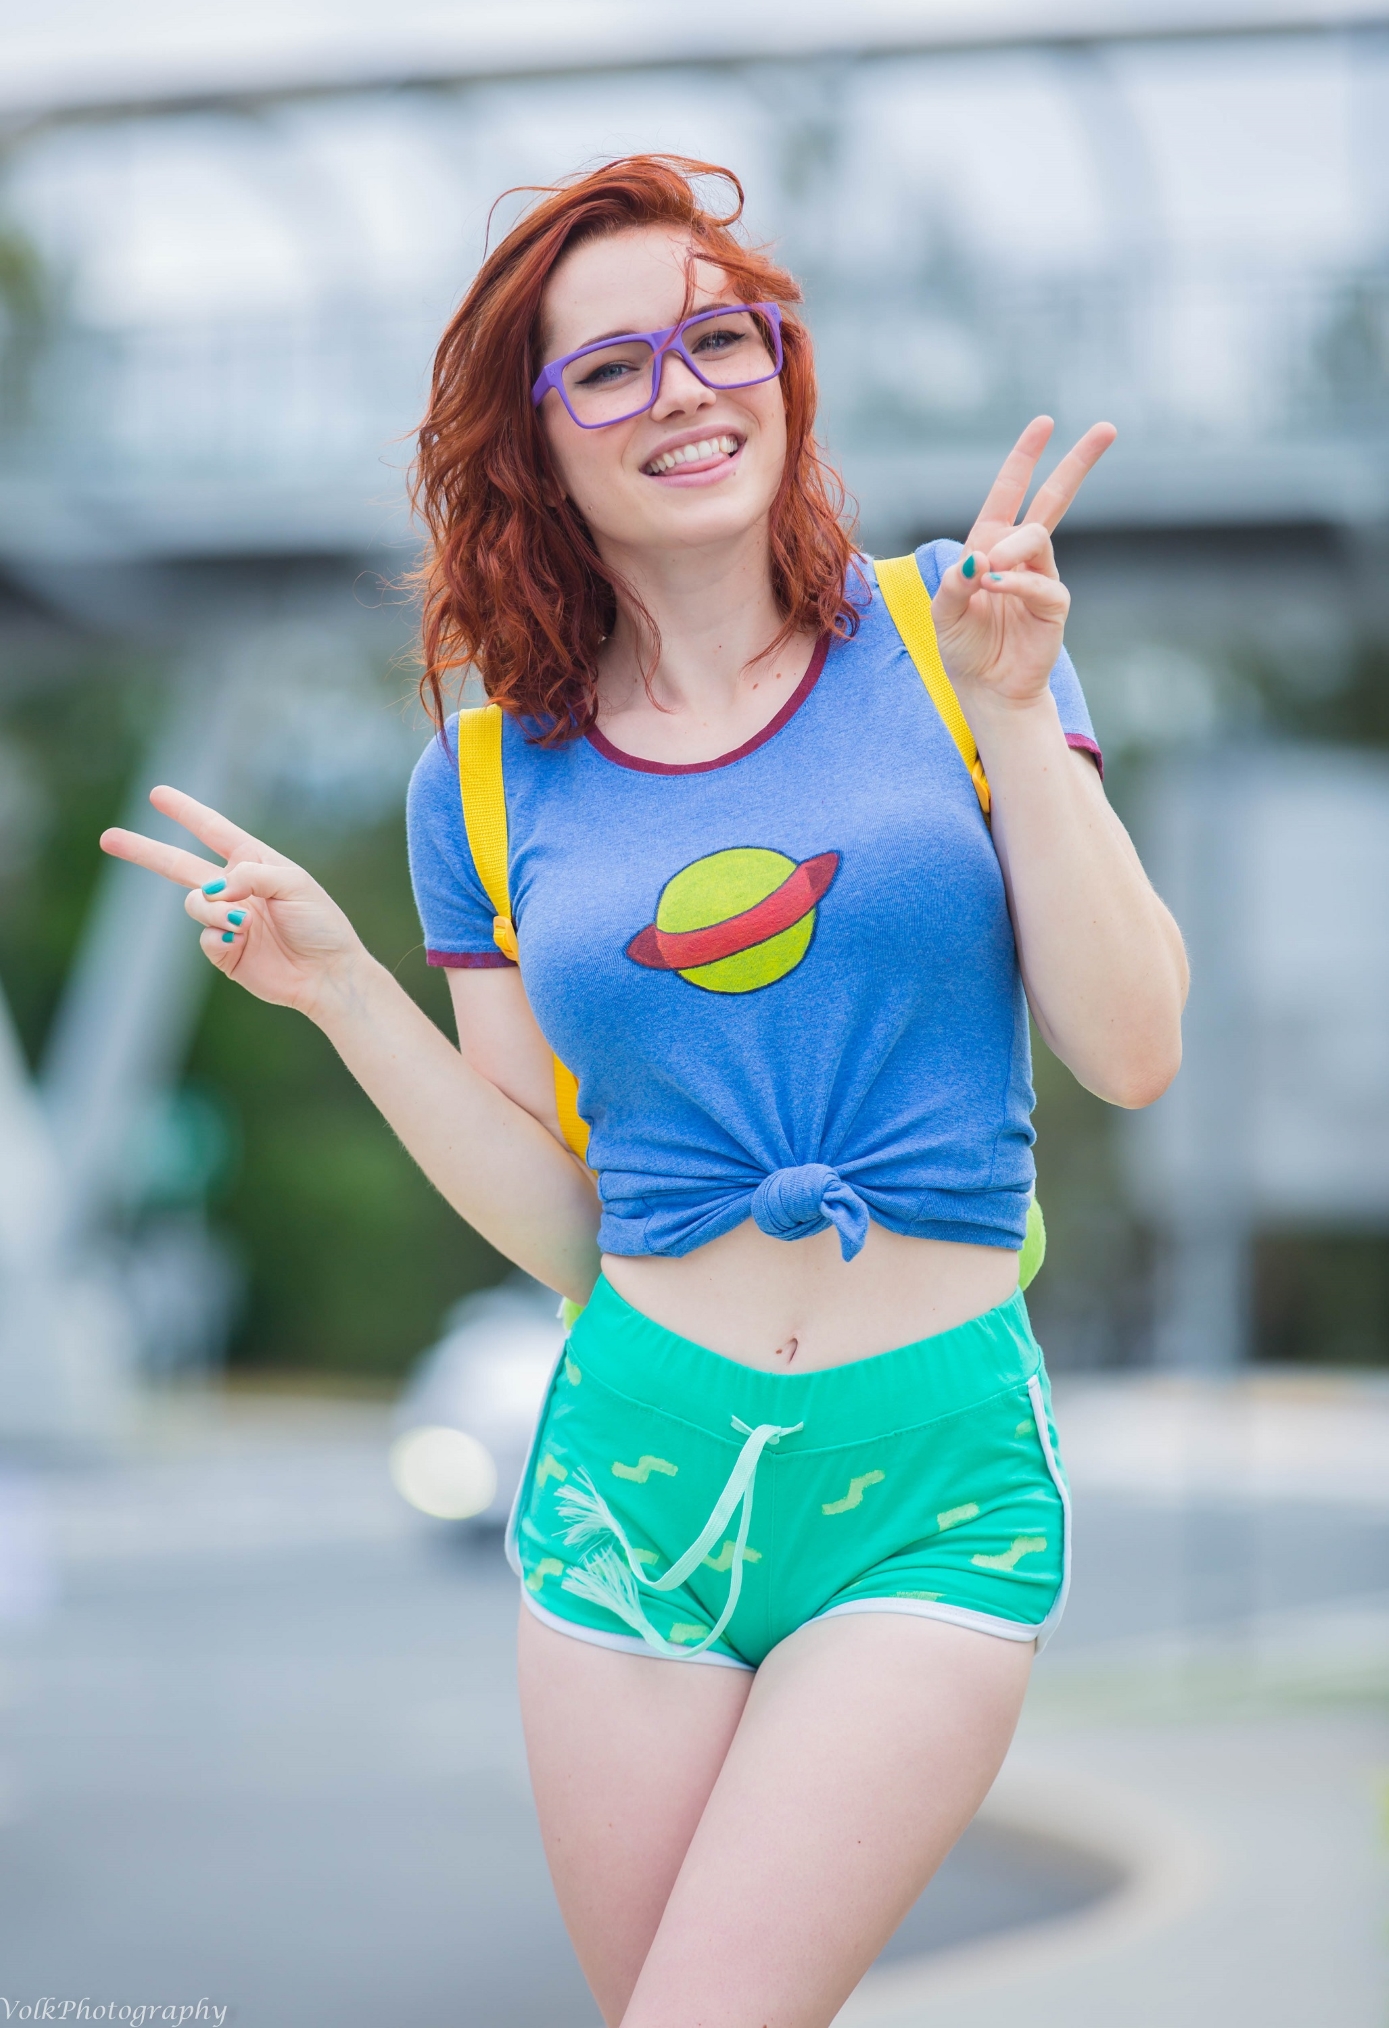 People 1389x2028 Nichameleon women model redhead fake glasses cosplay T-shirt short shorts belly looking at viewer smiling painted nails peace sign victory sign